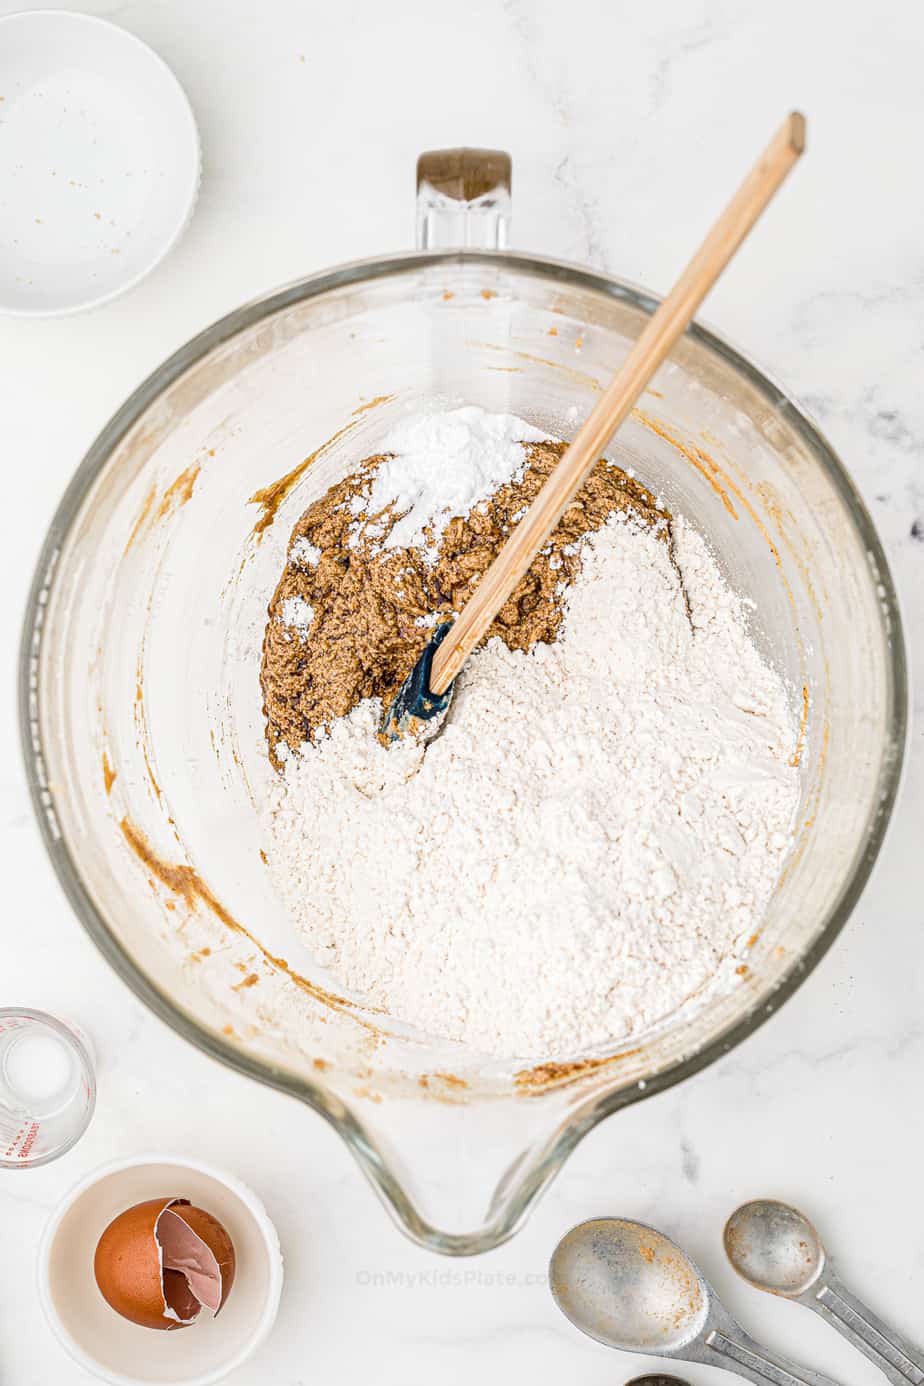 Mixing dry flour and other cookie ingredients into wet ingredients in a large mixing bowl from overhead